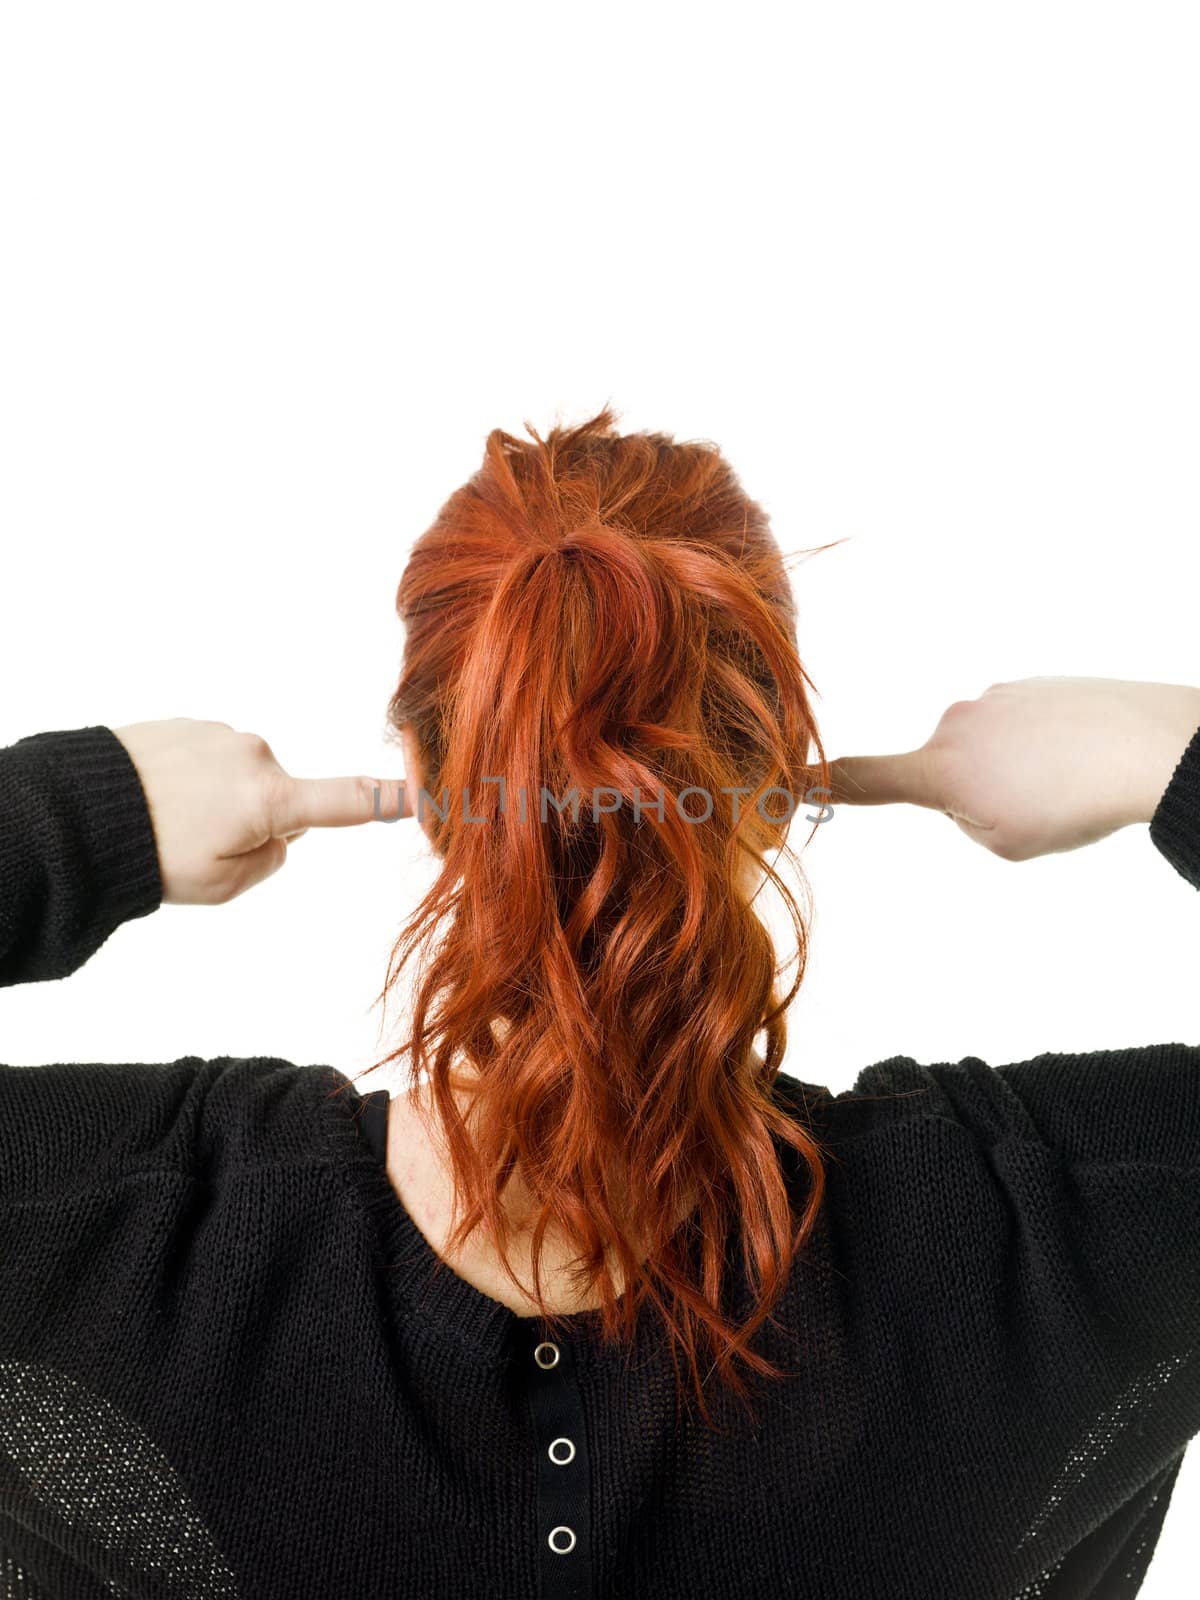 Red haired woman from behind with her fingers in her ears